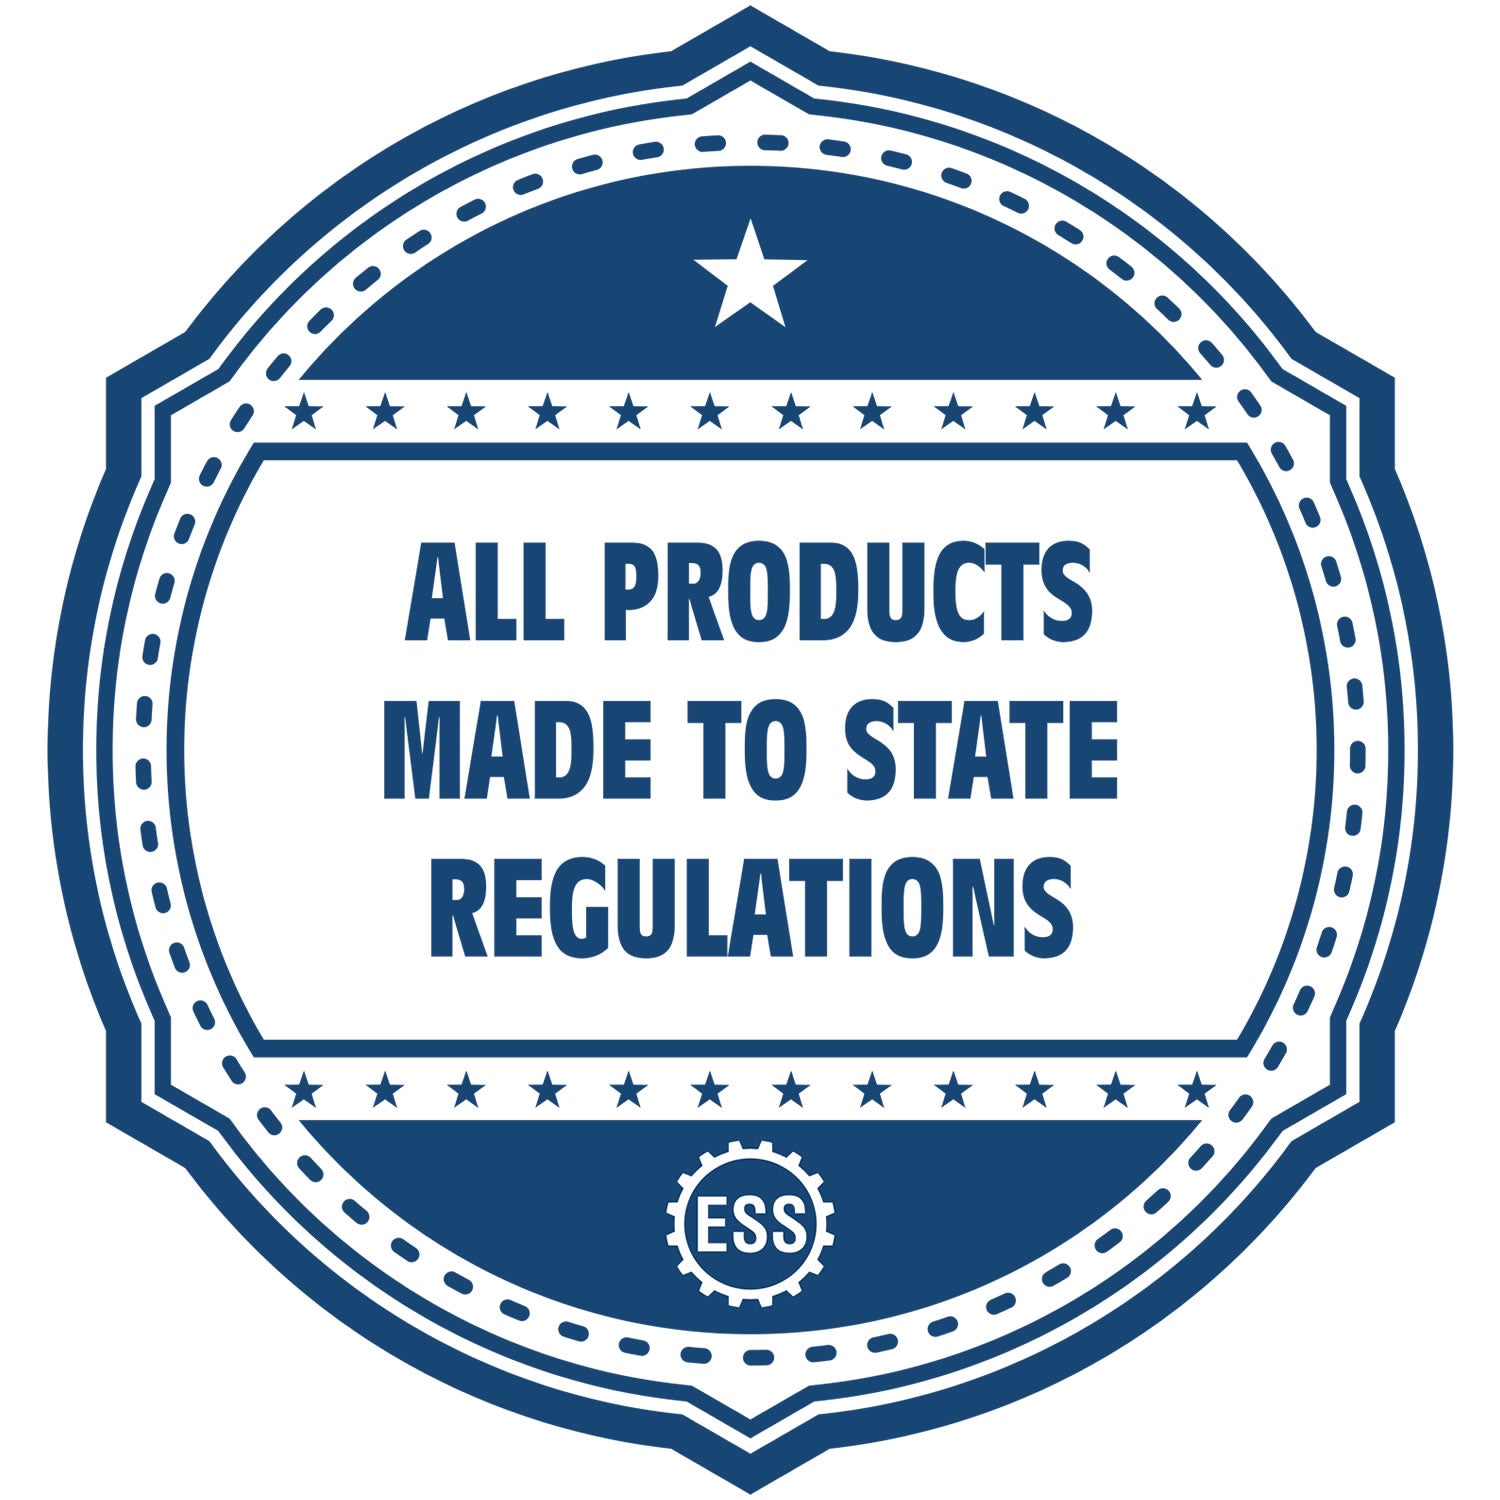 A blue icon or badge for the Hybrid Oregon Engineer Seal showing that this product is made in compliance with state regulations.